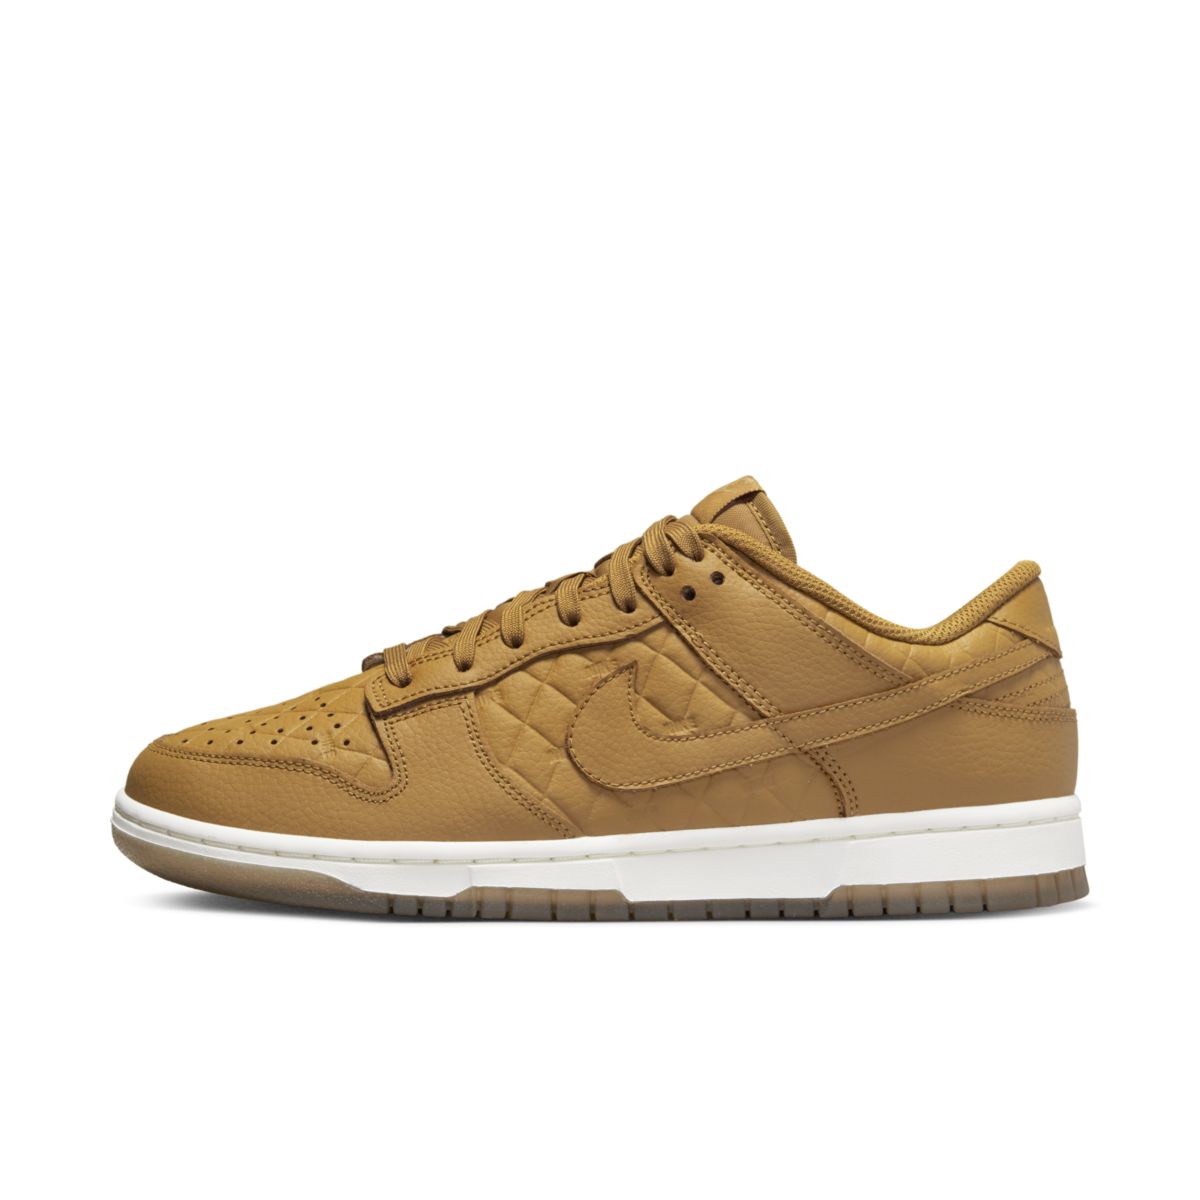 Nike Dunk Low Quilted Wheat DX3374-700 2